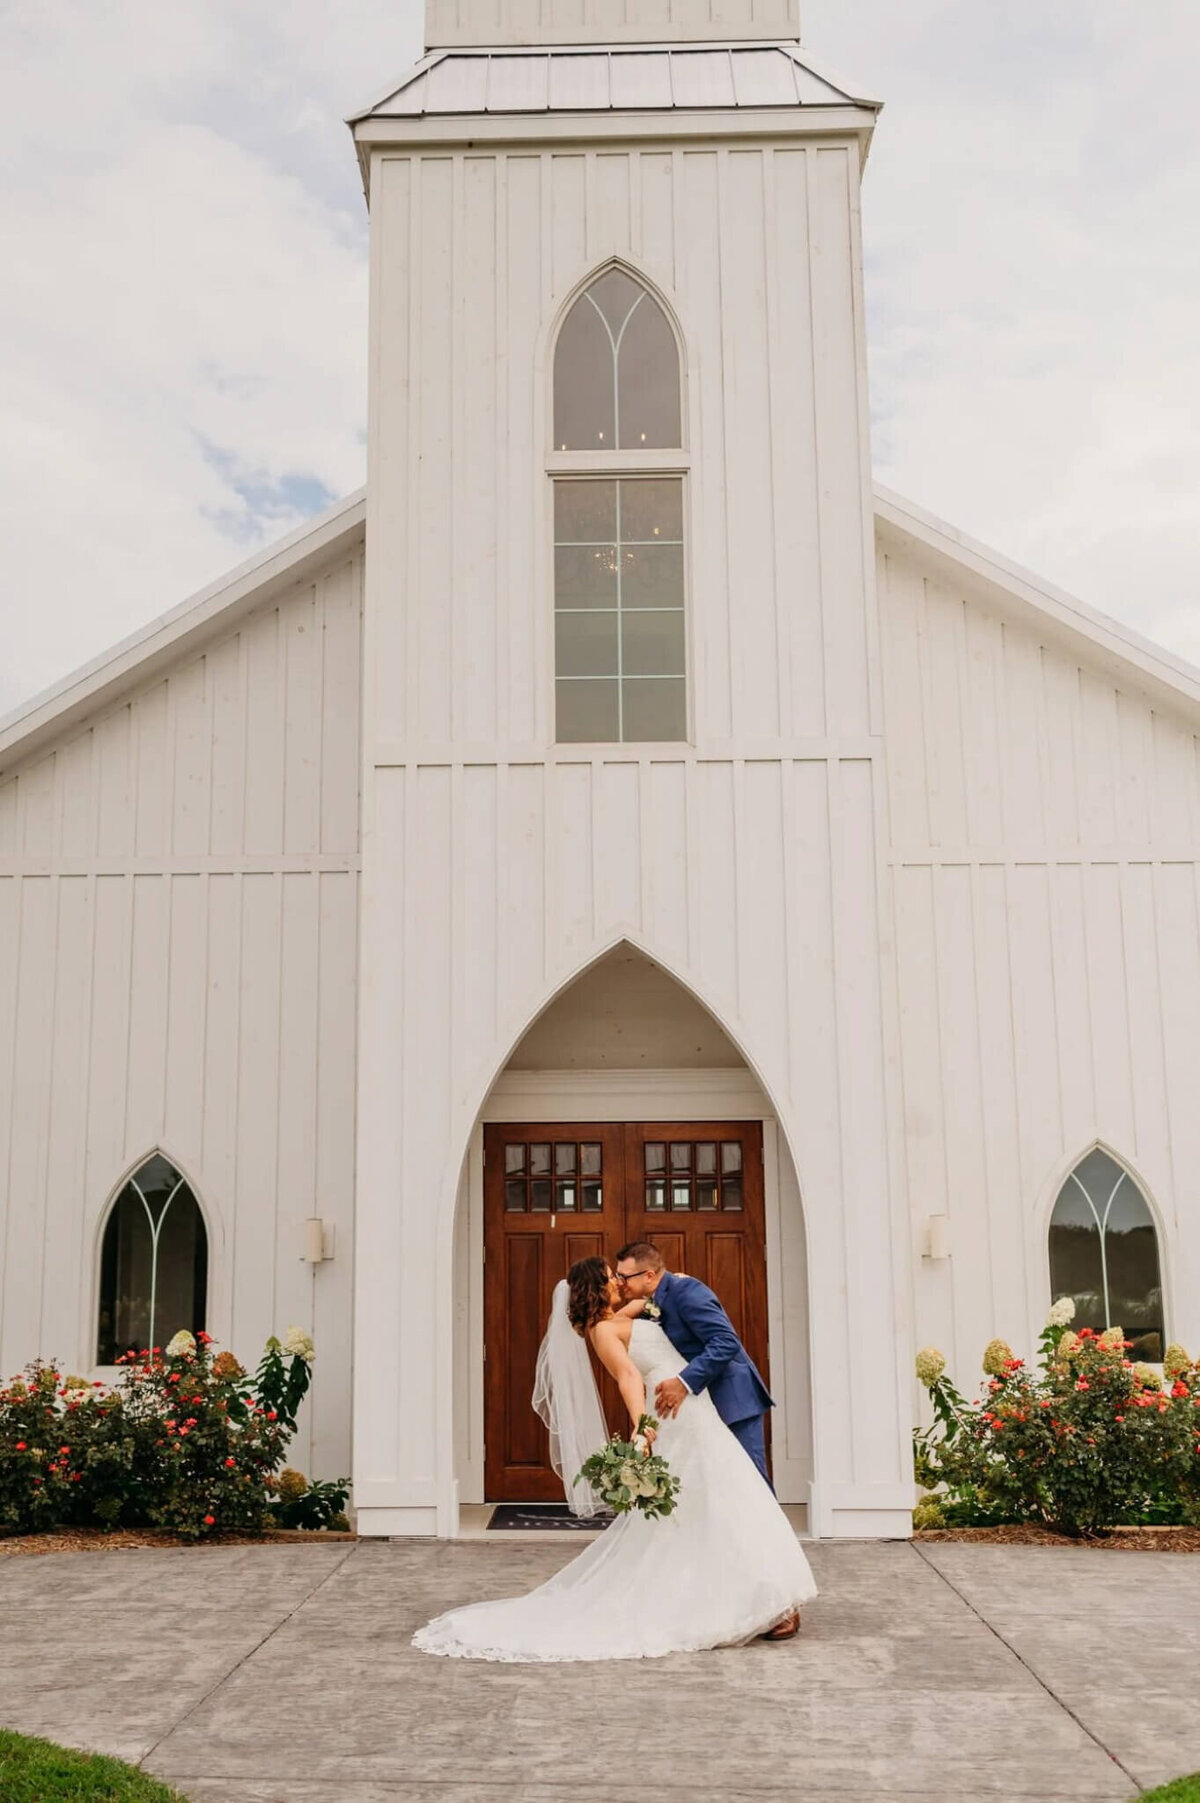 photo of a bride and groom dipping and kissing in front of a white wedding chapel in Tennessee